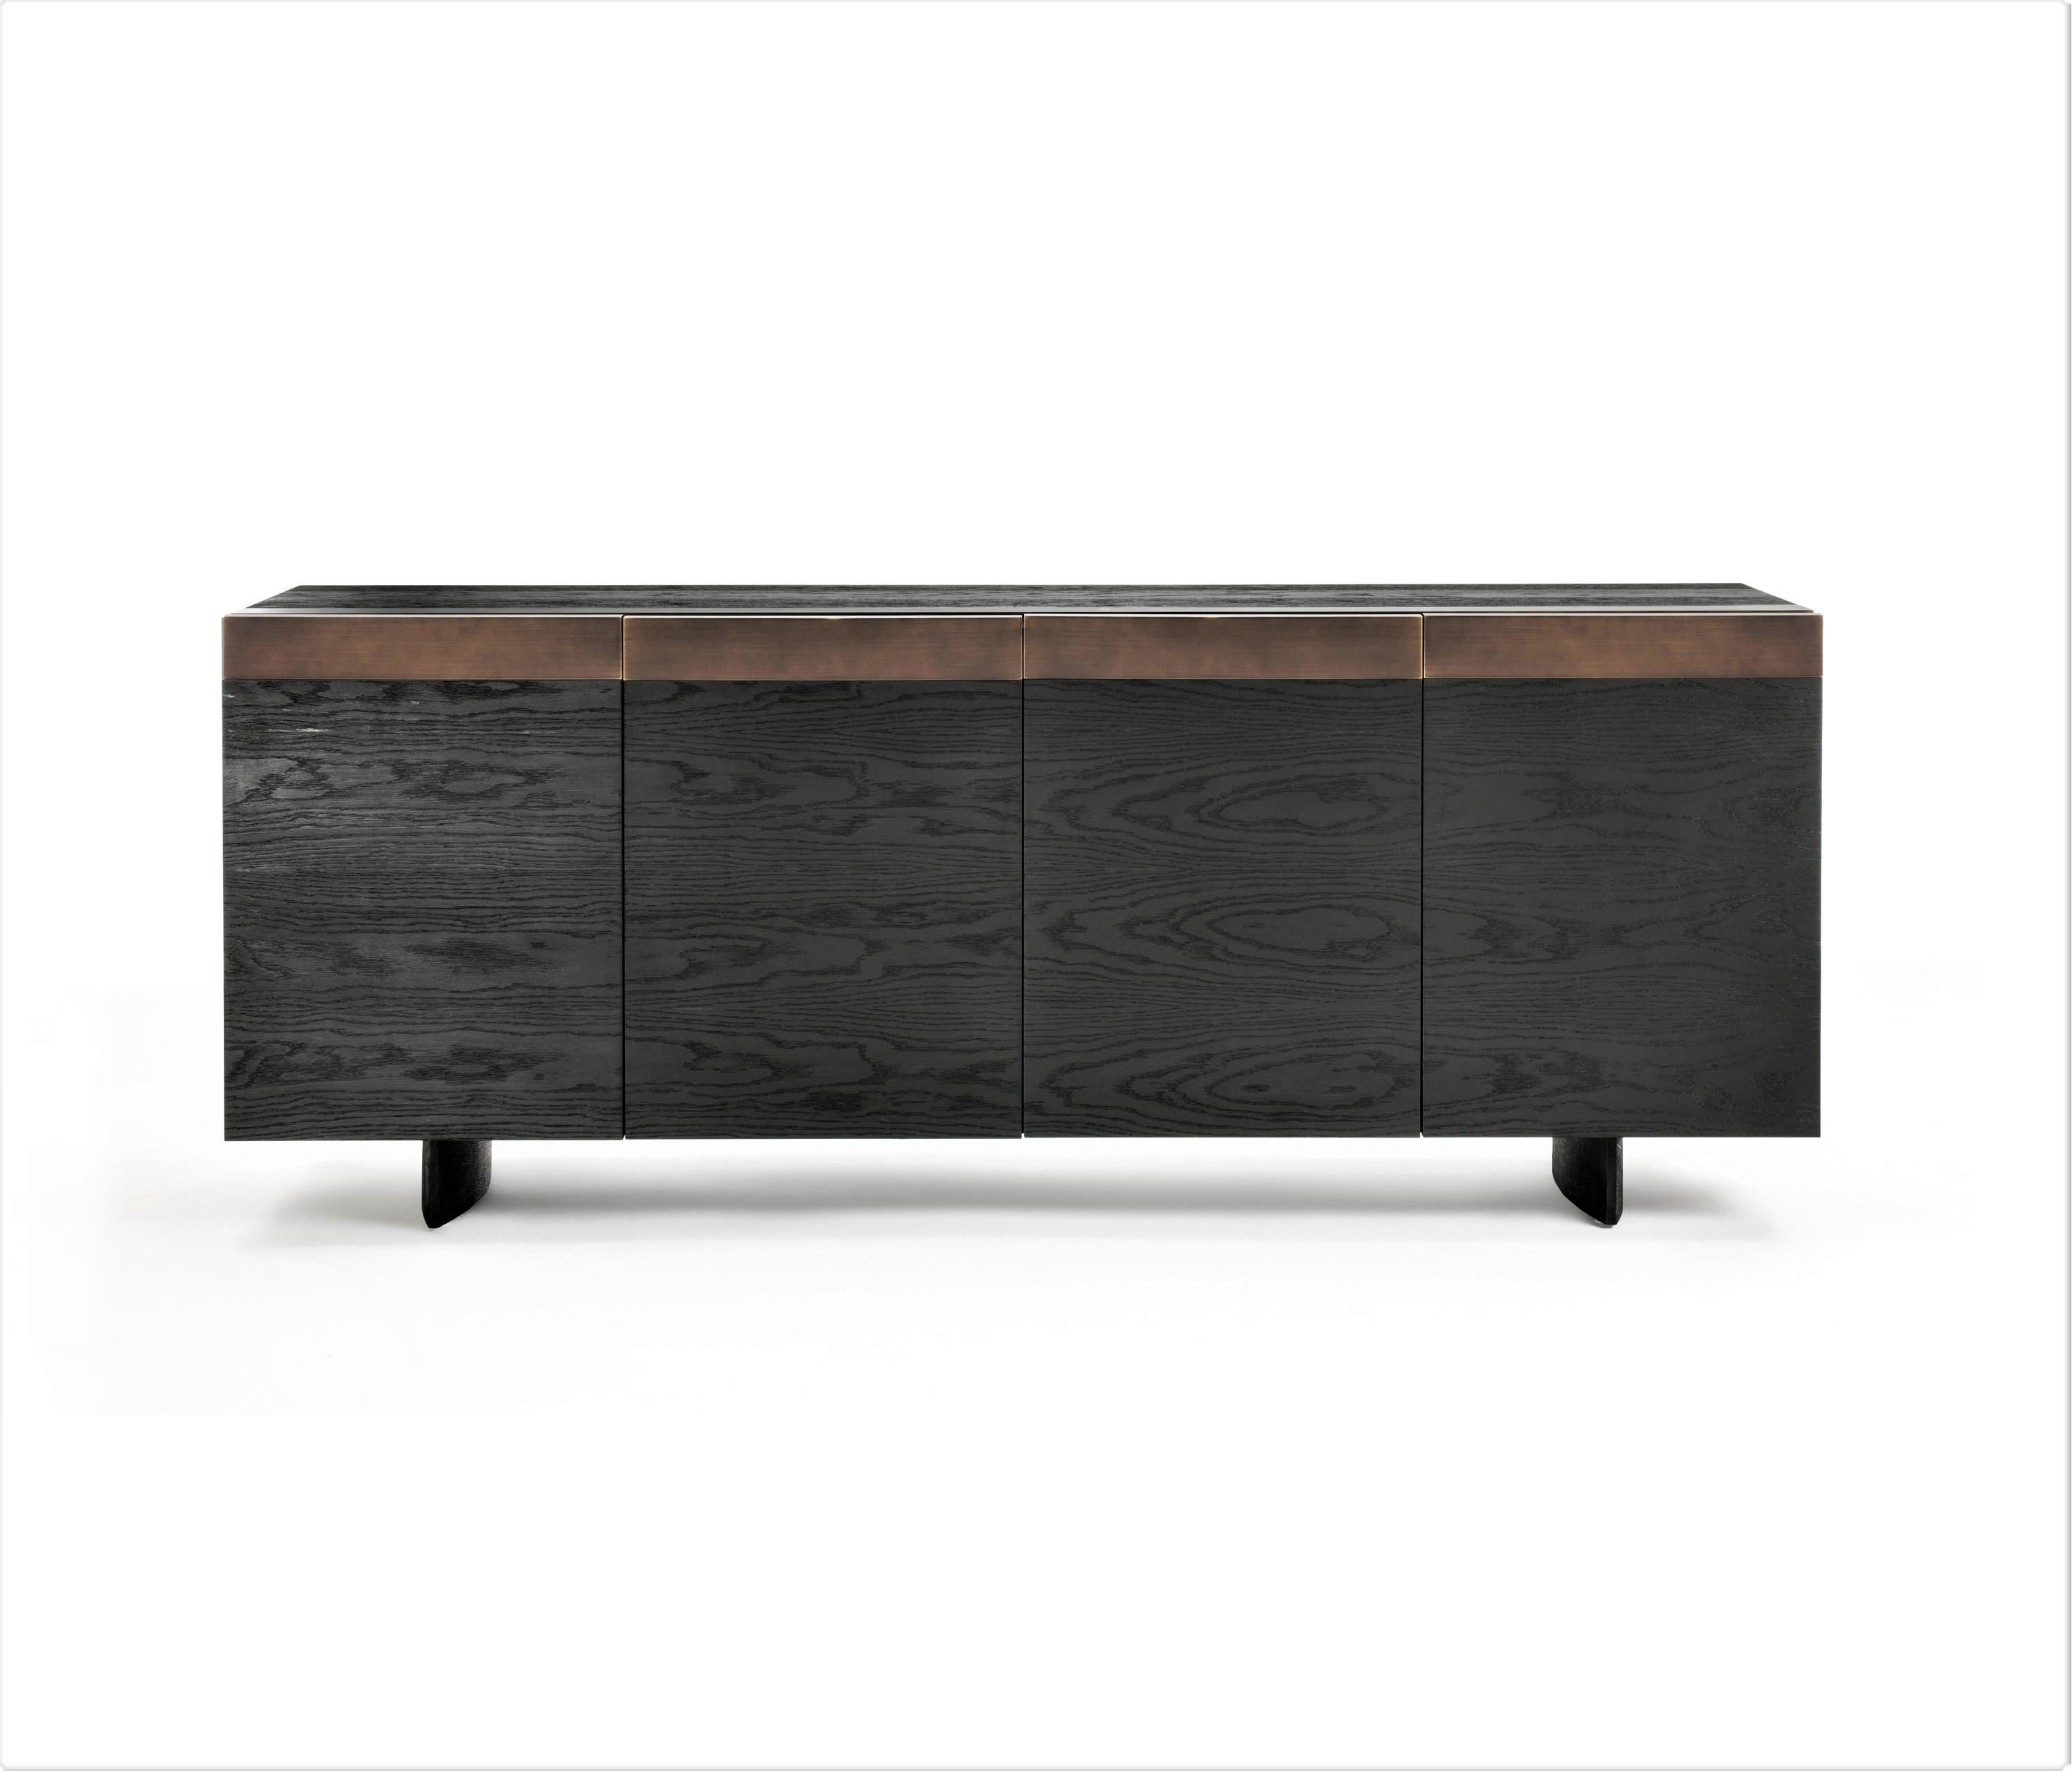 This piece is entirely made in Italy preserving the craftsmanship in the age of technology, with timeless creations which don’t follow short-term trends.
Crafted of solid oakwood pigmented in black, with doors and pull-out shelves inside. With an